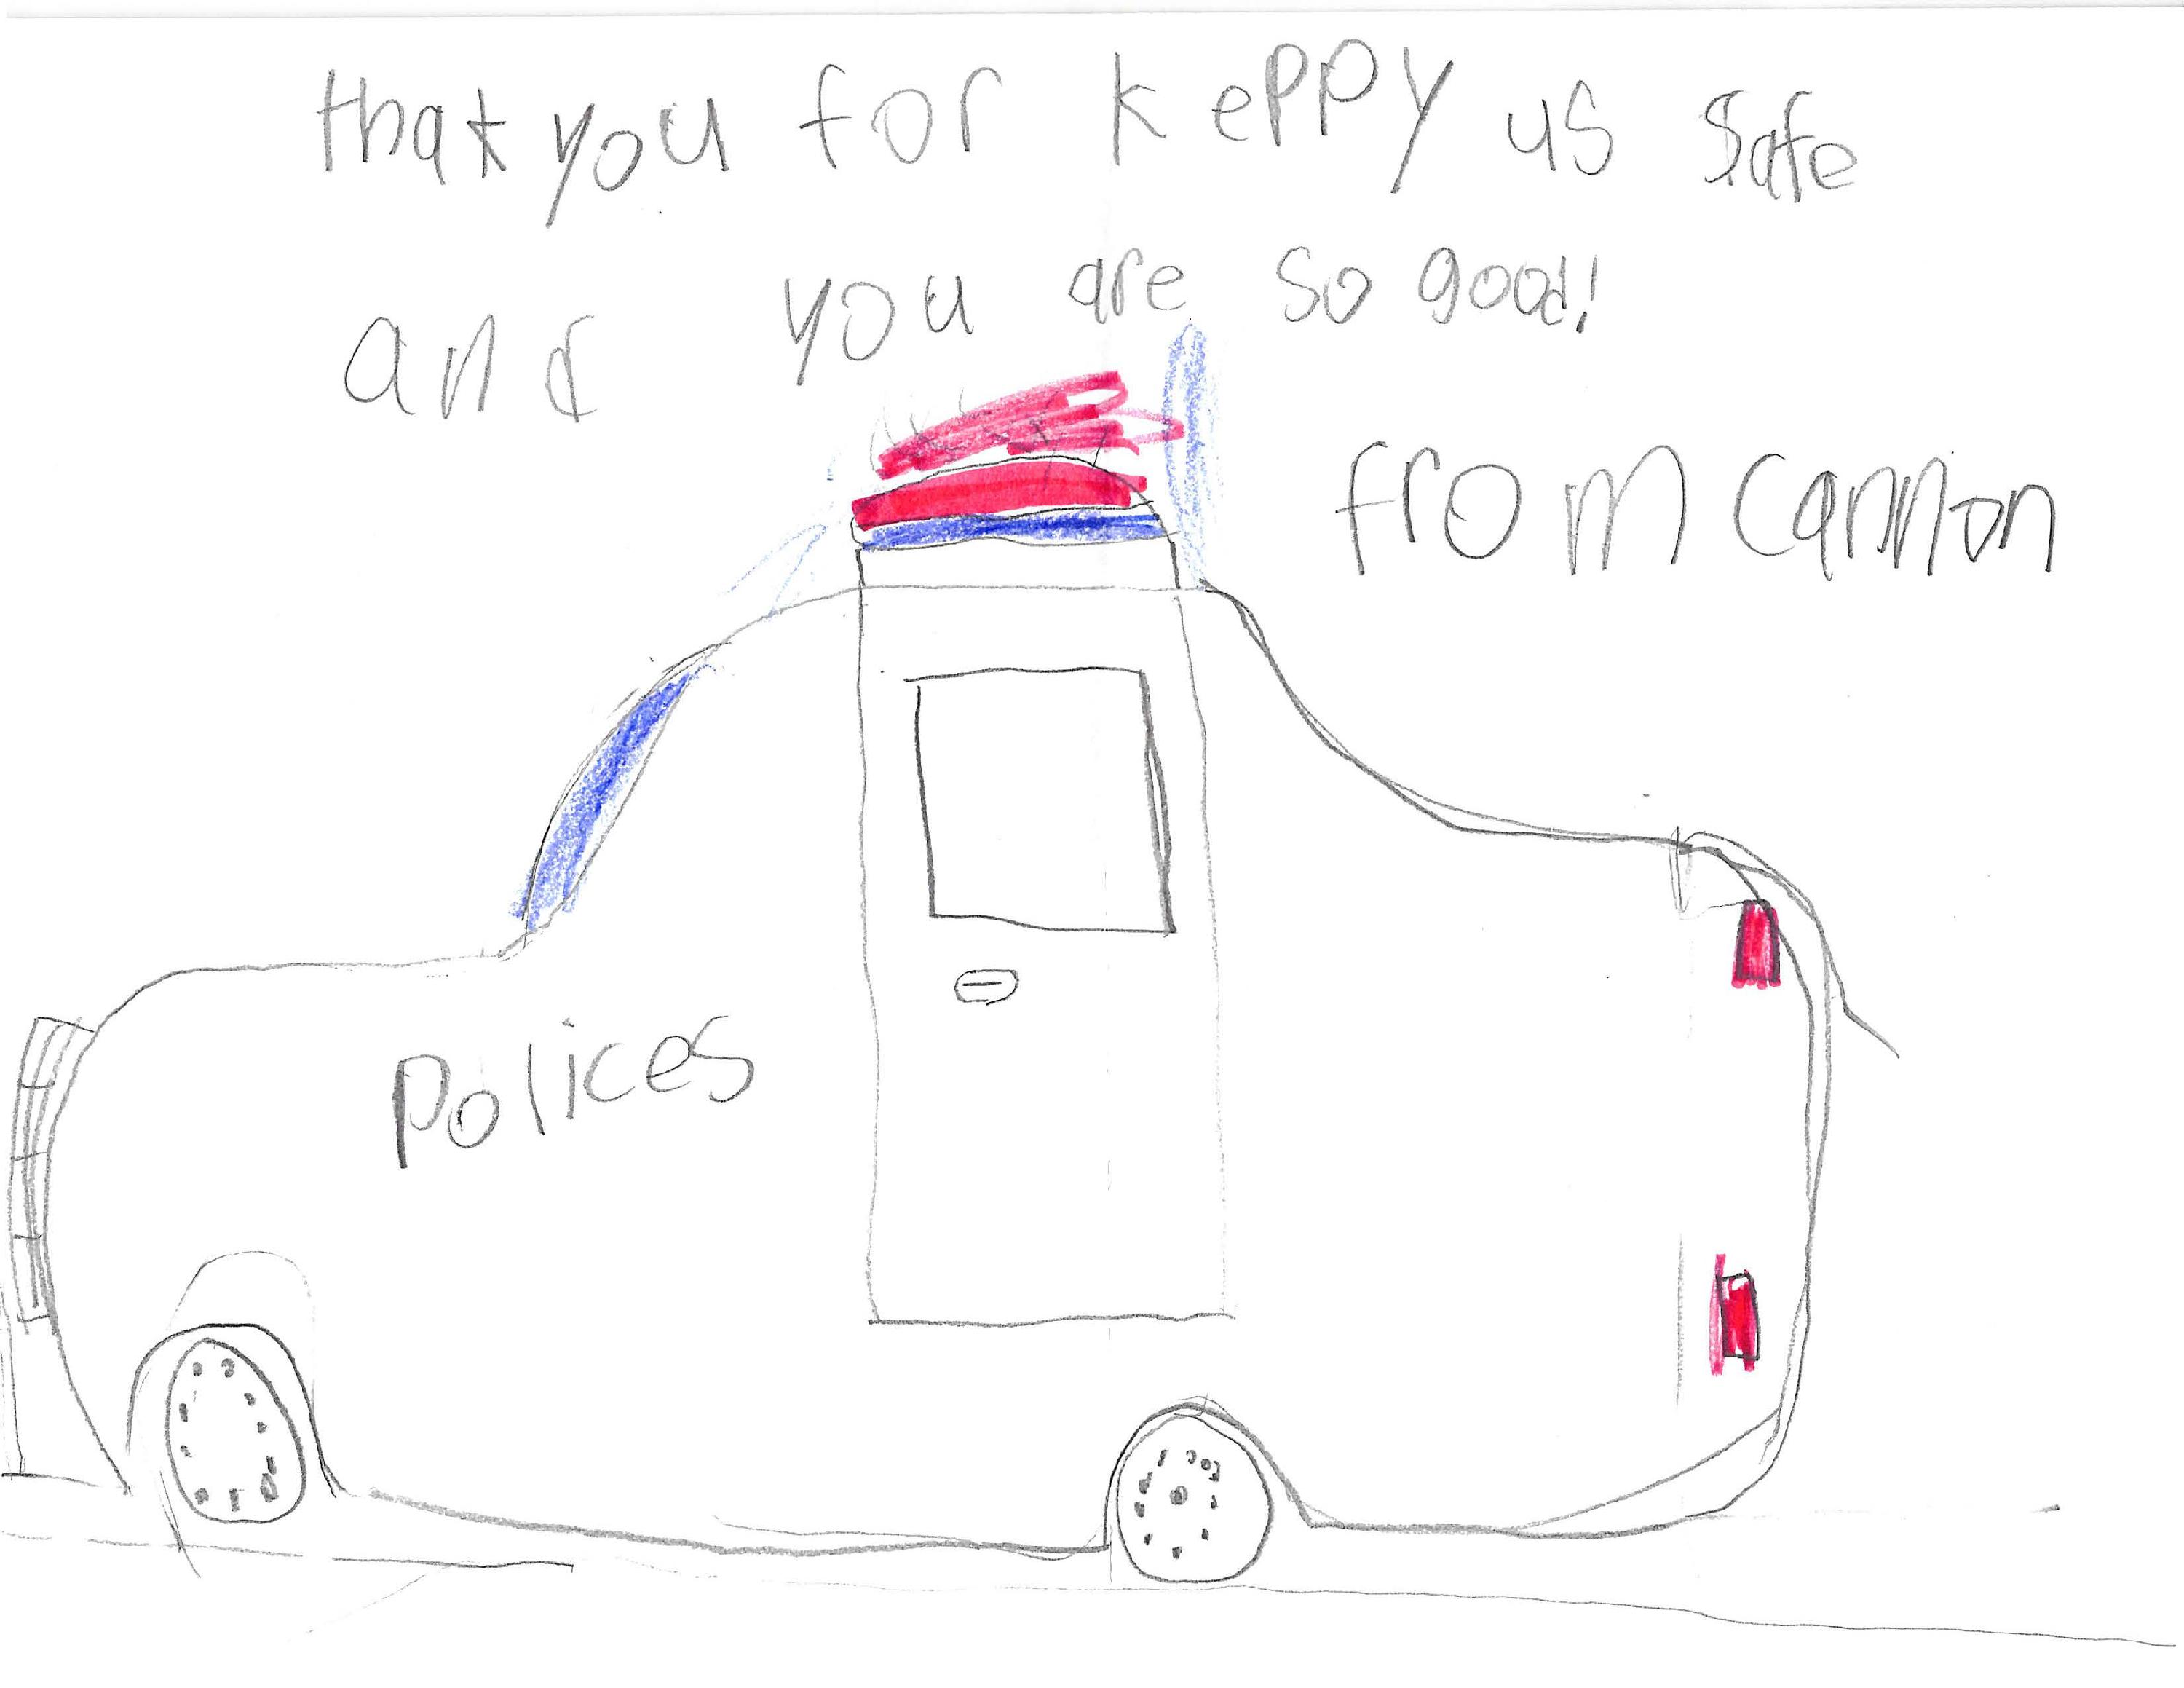 Polices Card